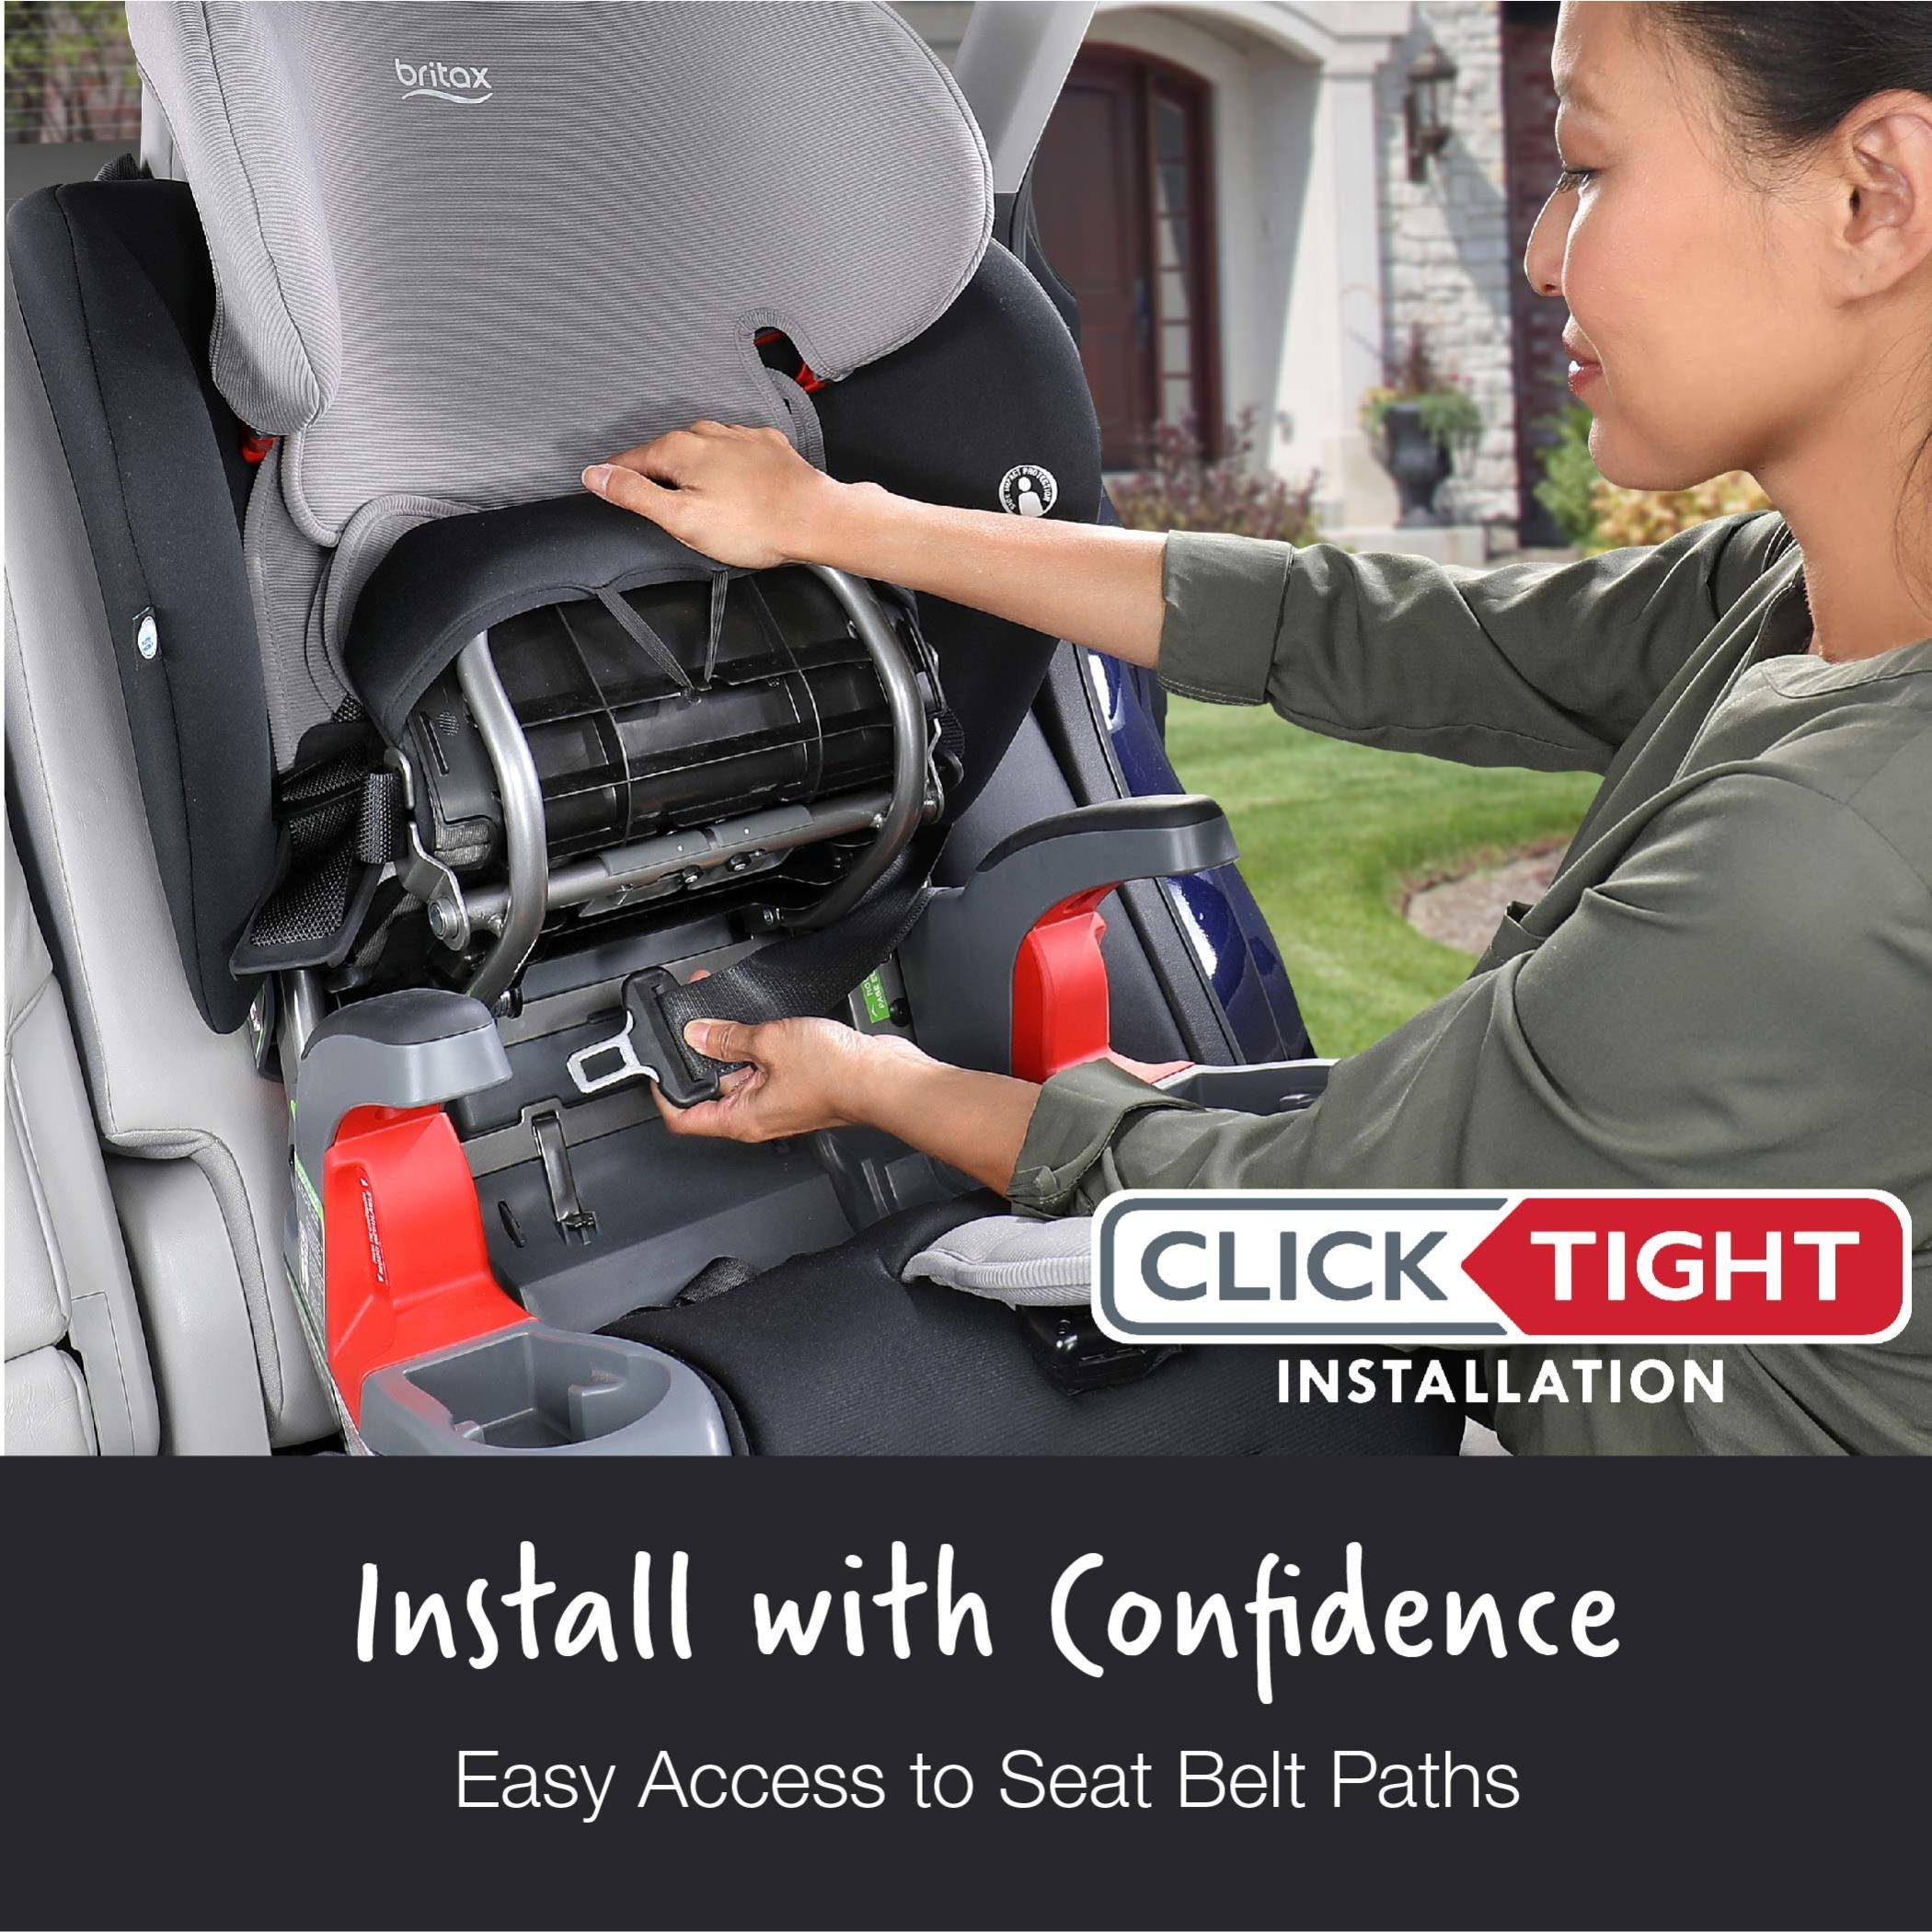 Mother Installing her Grow With You ClickTight Car Seat using ClickTight Installation (Copy)